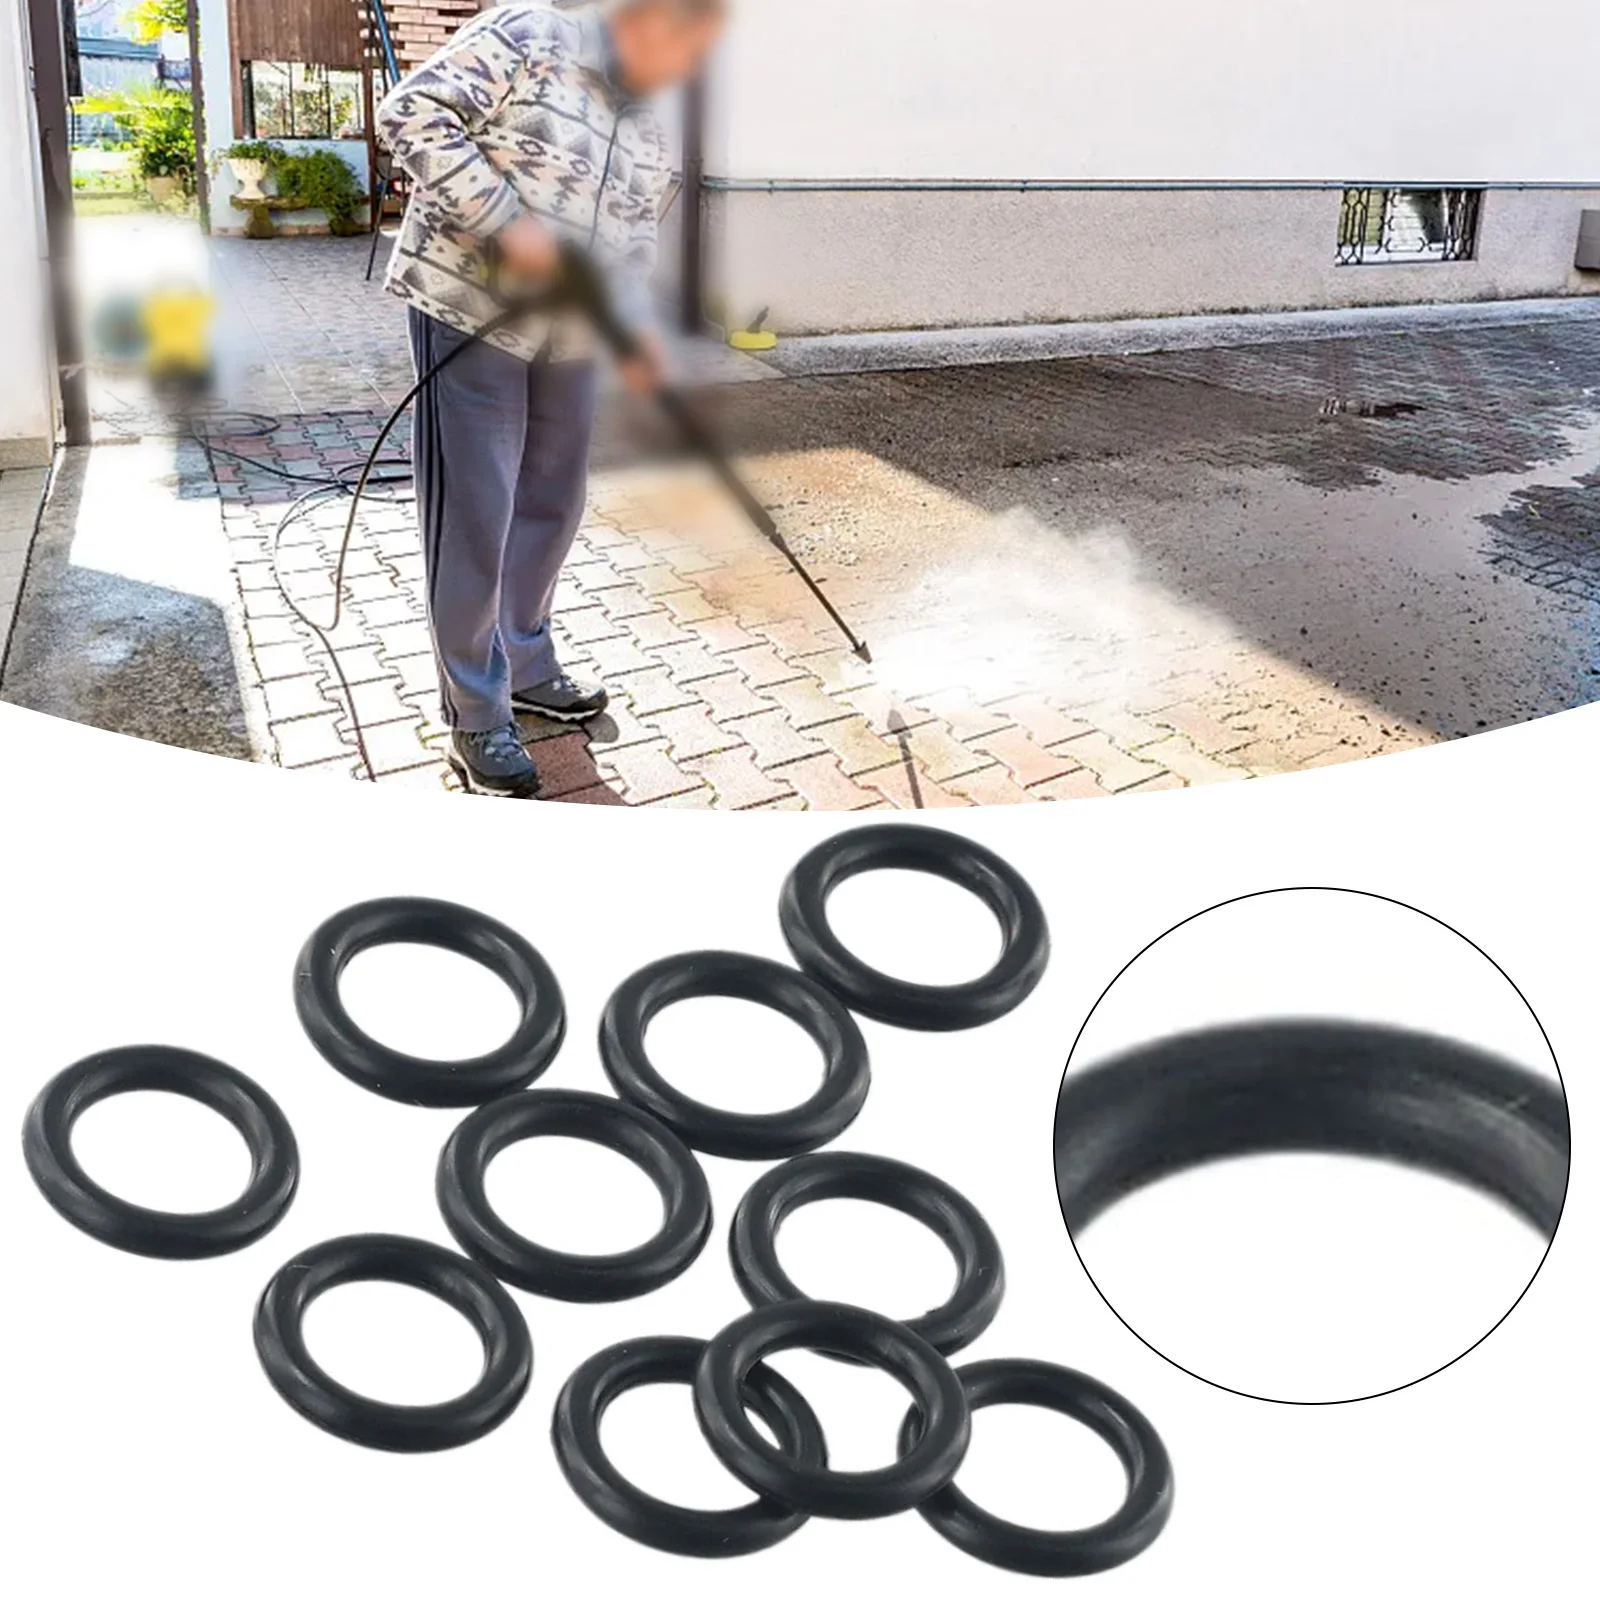 

20pc 1/4 O-Rings Rubber Washer Sealing Ring High Pressure Cleaning Hose Quick Disconnect Connector Tool Hardware Accessories